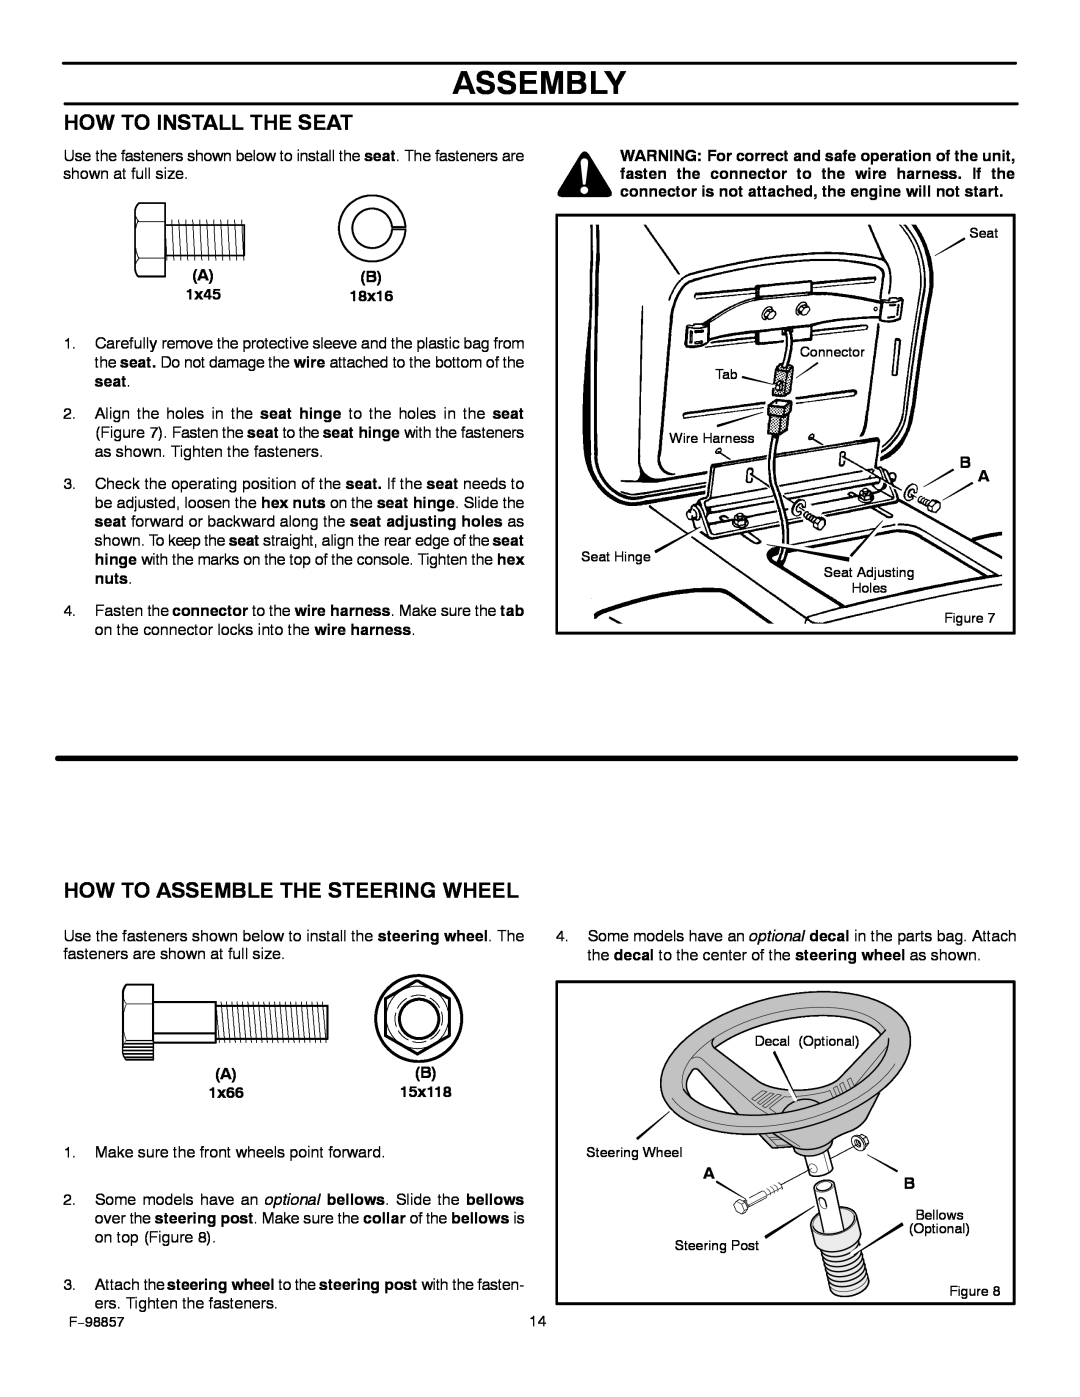 Hayter Mowers 30-Dec manual How To Install The Seat, How To Assemble The Steering Wheel, Assembly 